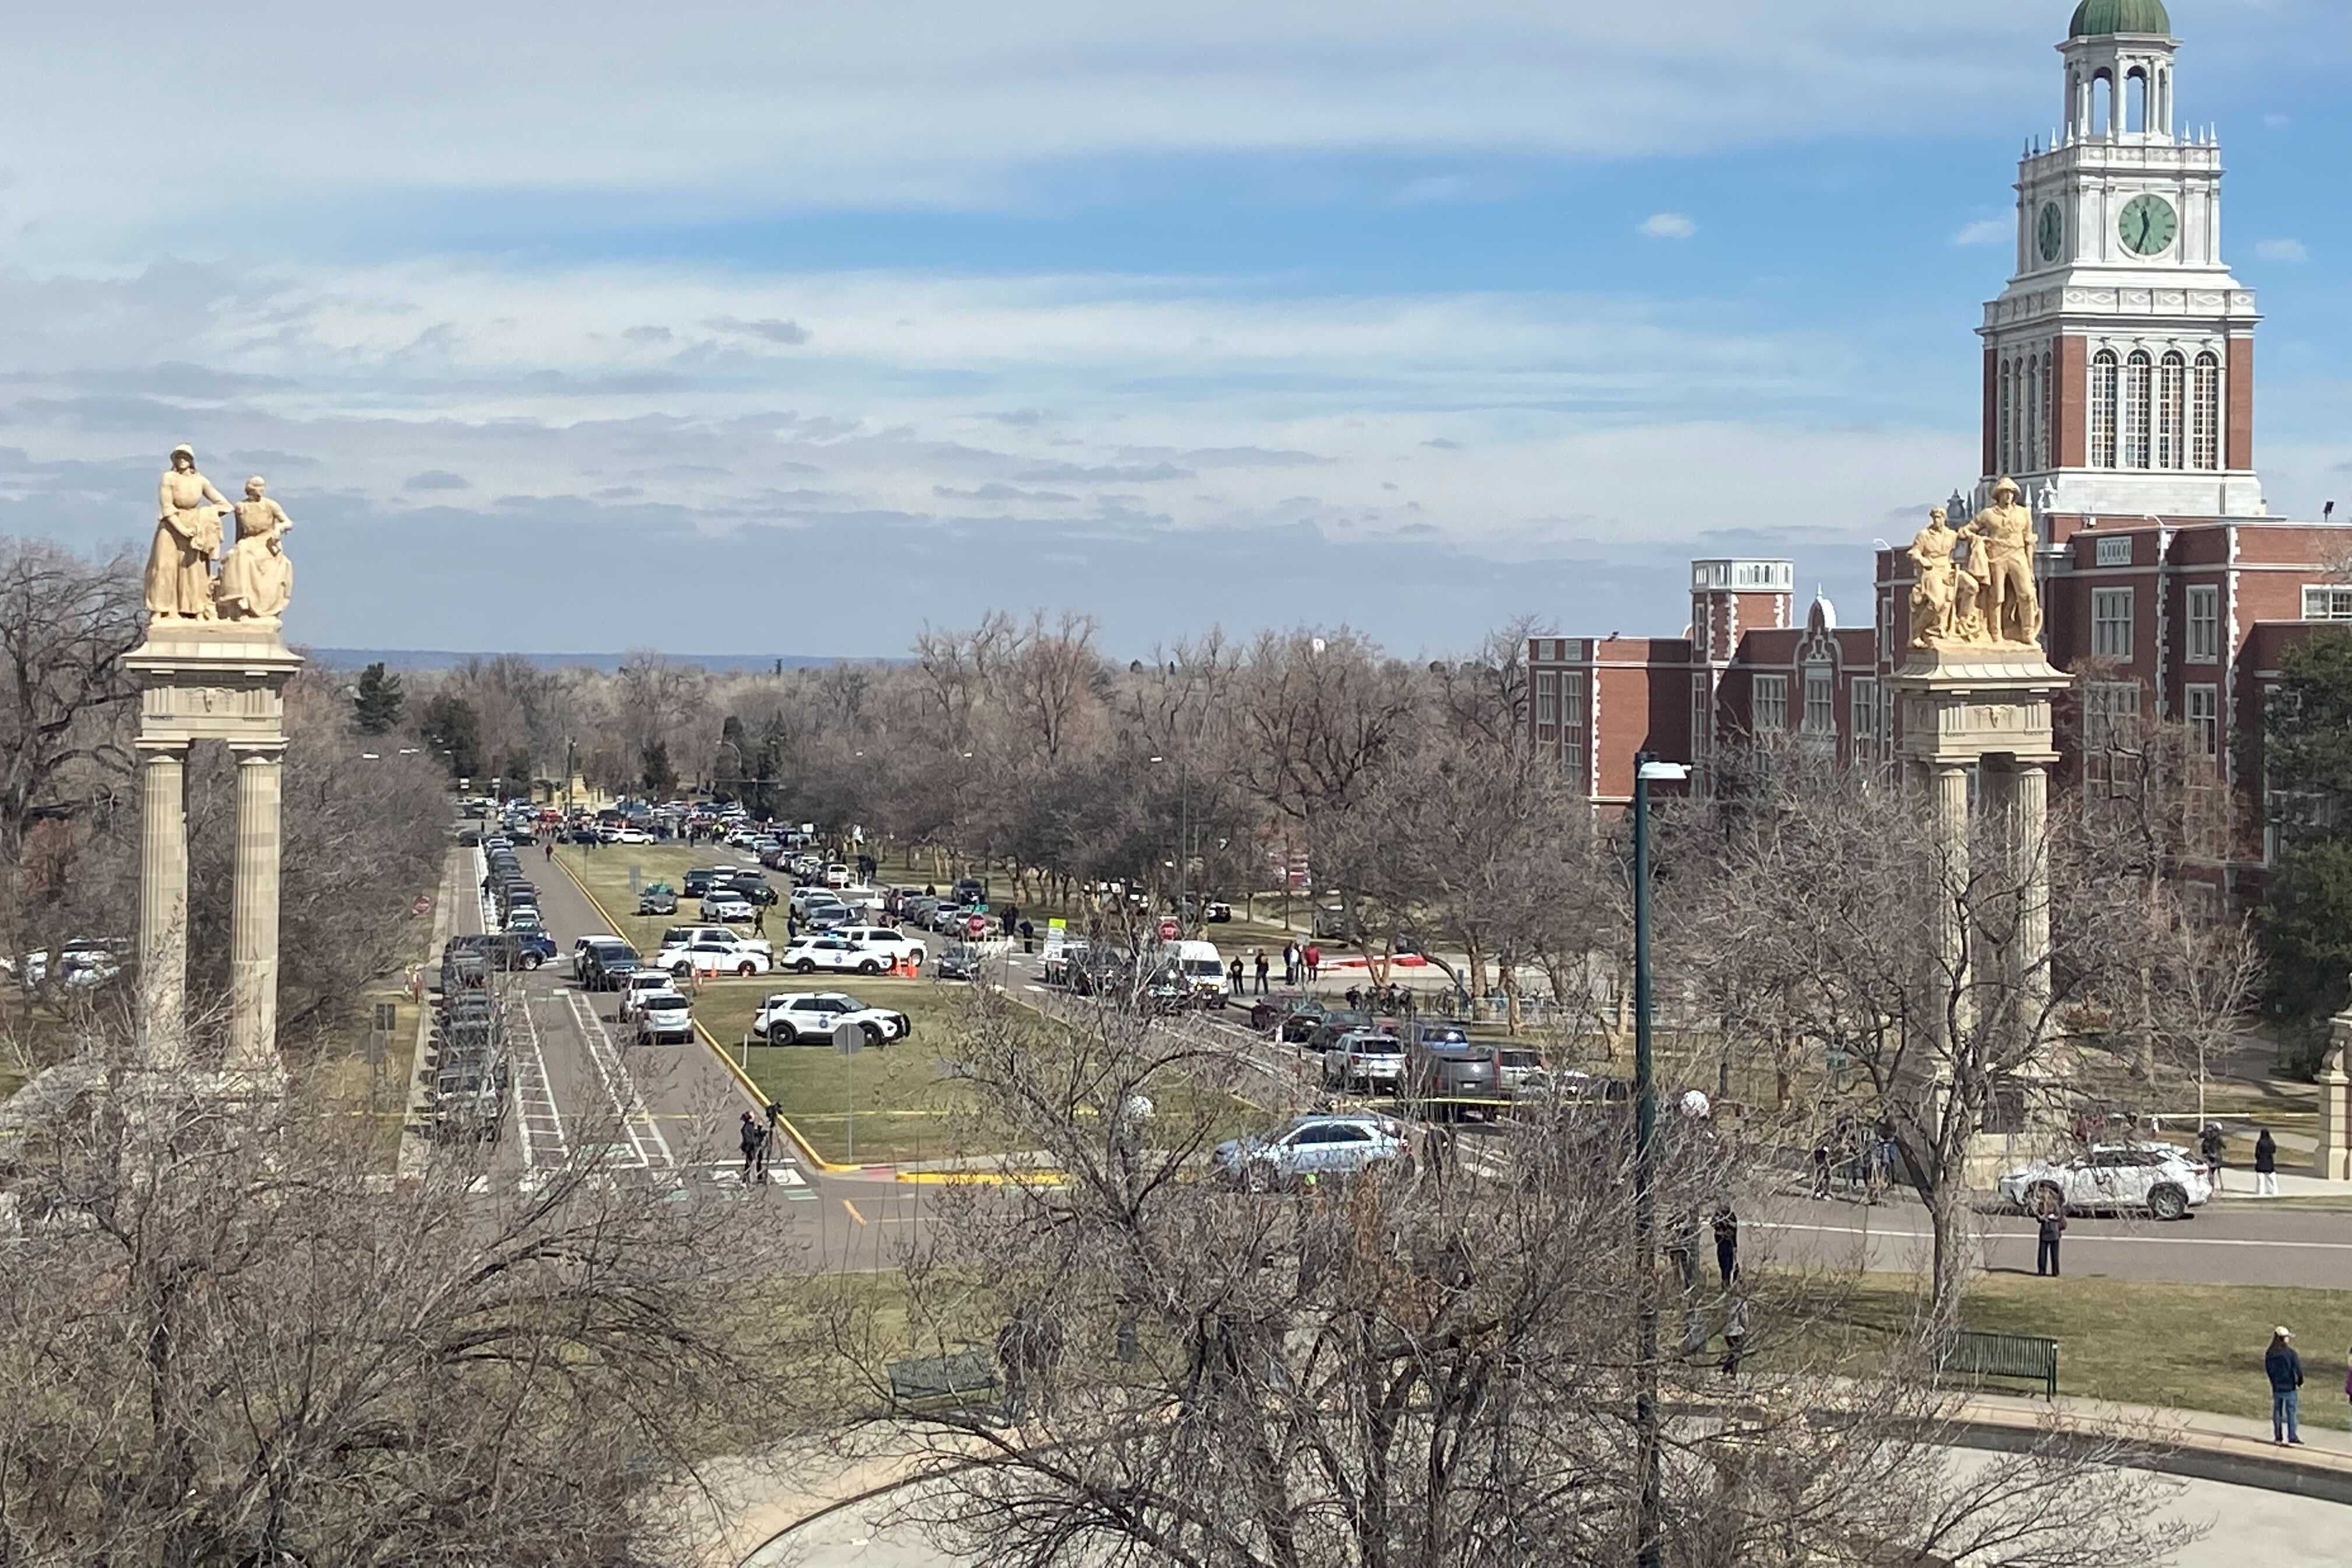 East High School and the surrounding campus full of police vehicles is seen from a distance. 